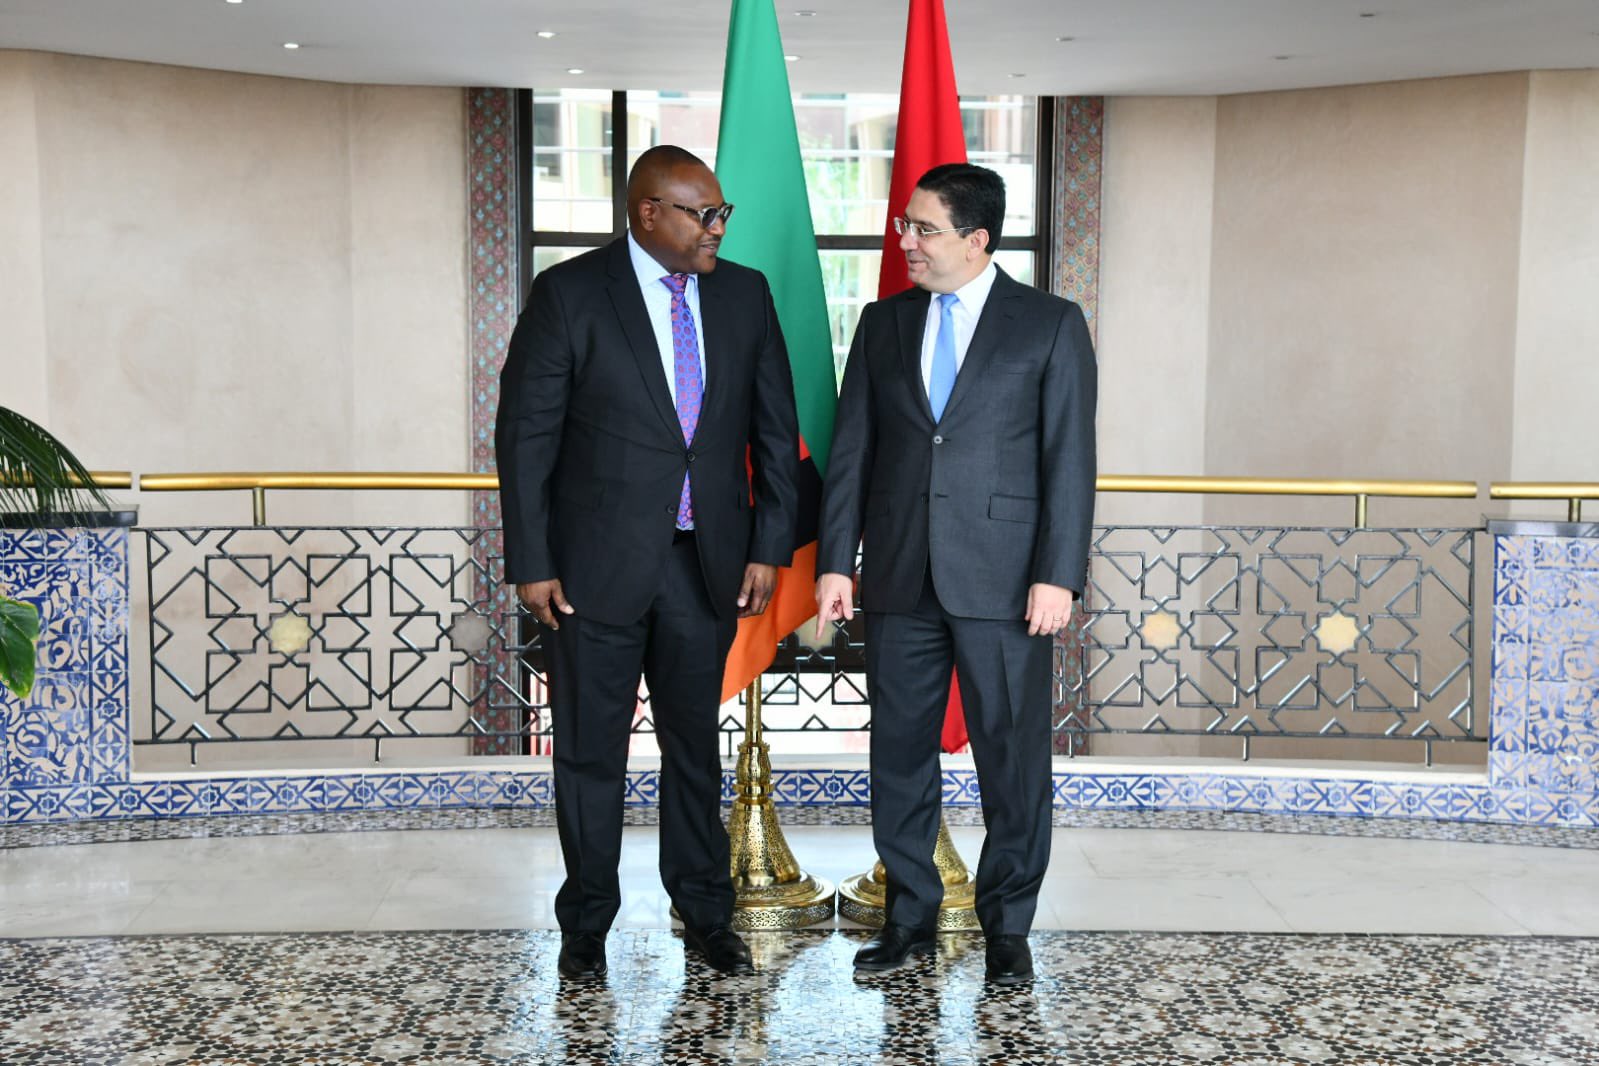 Zambia reiterates support for Morocco’s territorial integrity, Autonomy Plan for the Sahara, hails Royal Atlantic Initiative